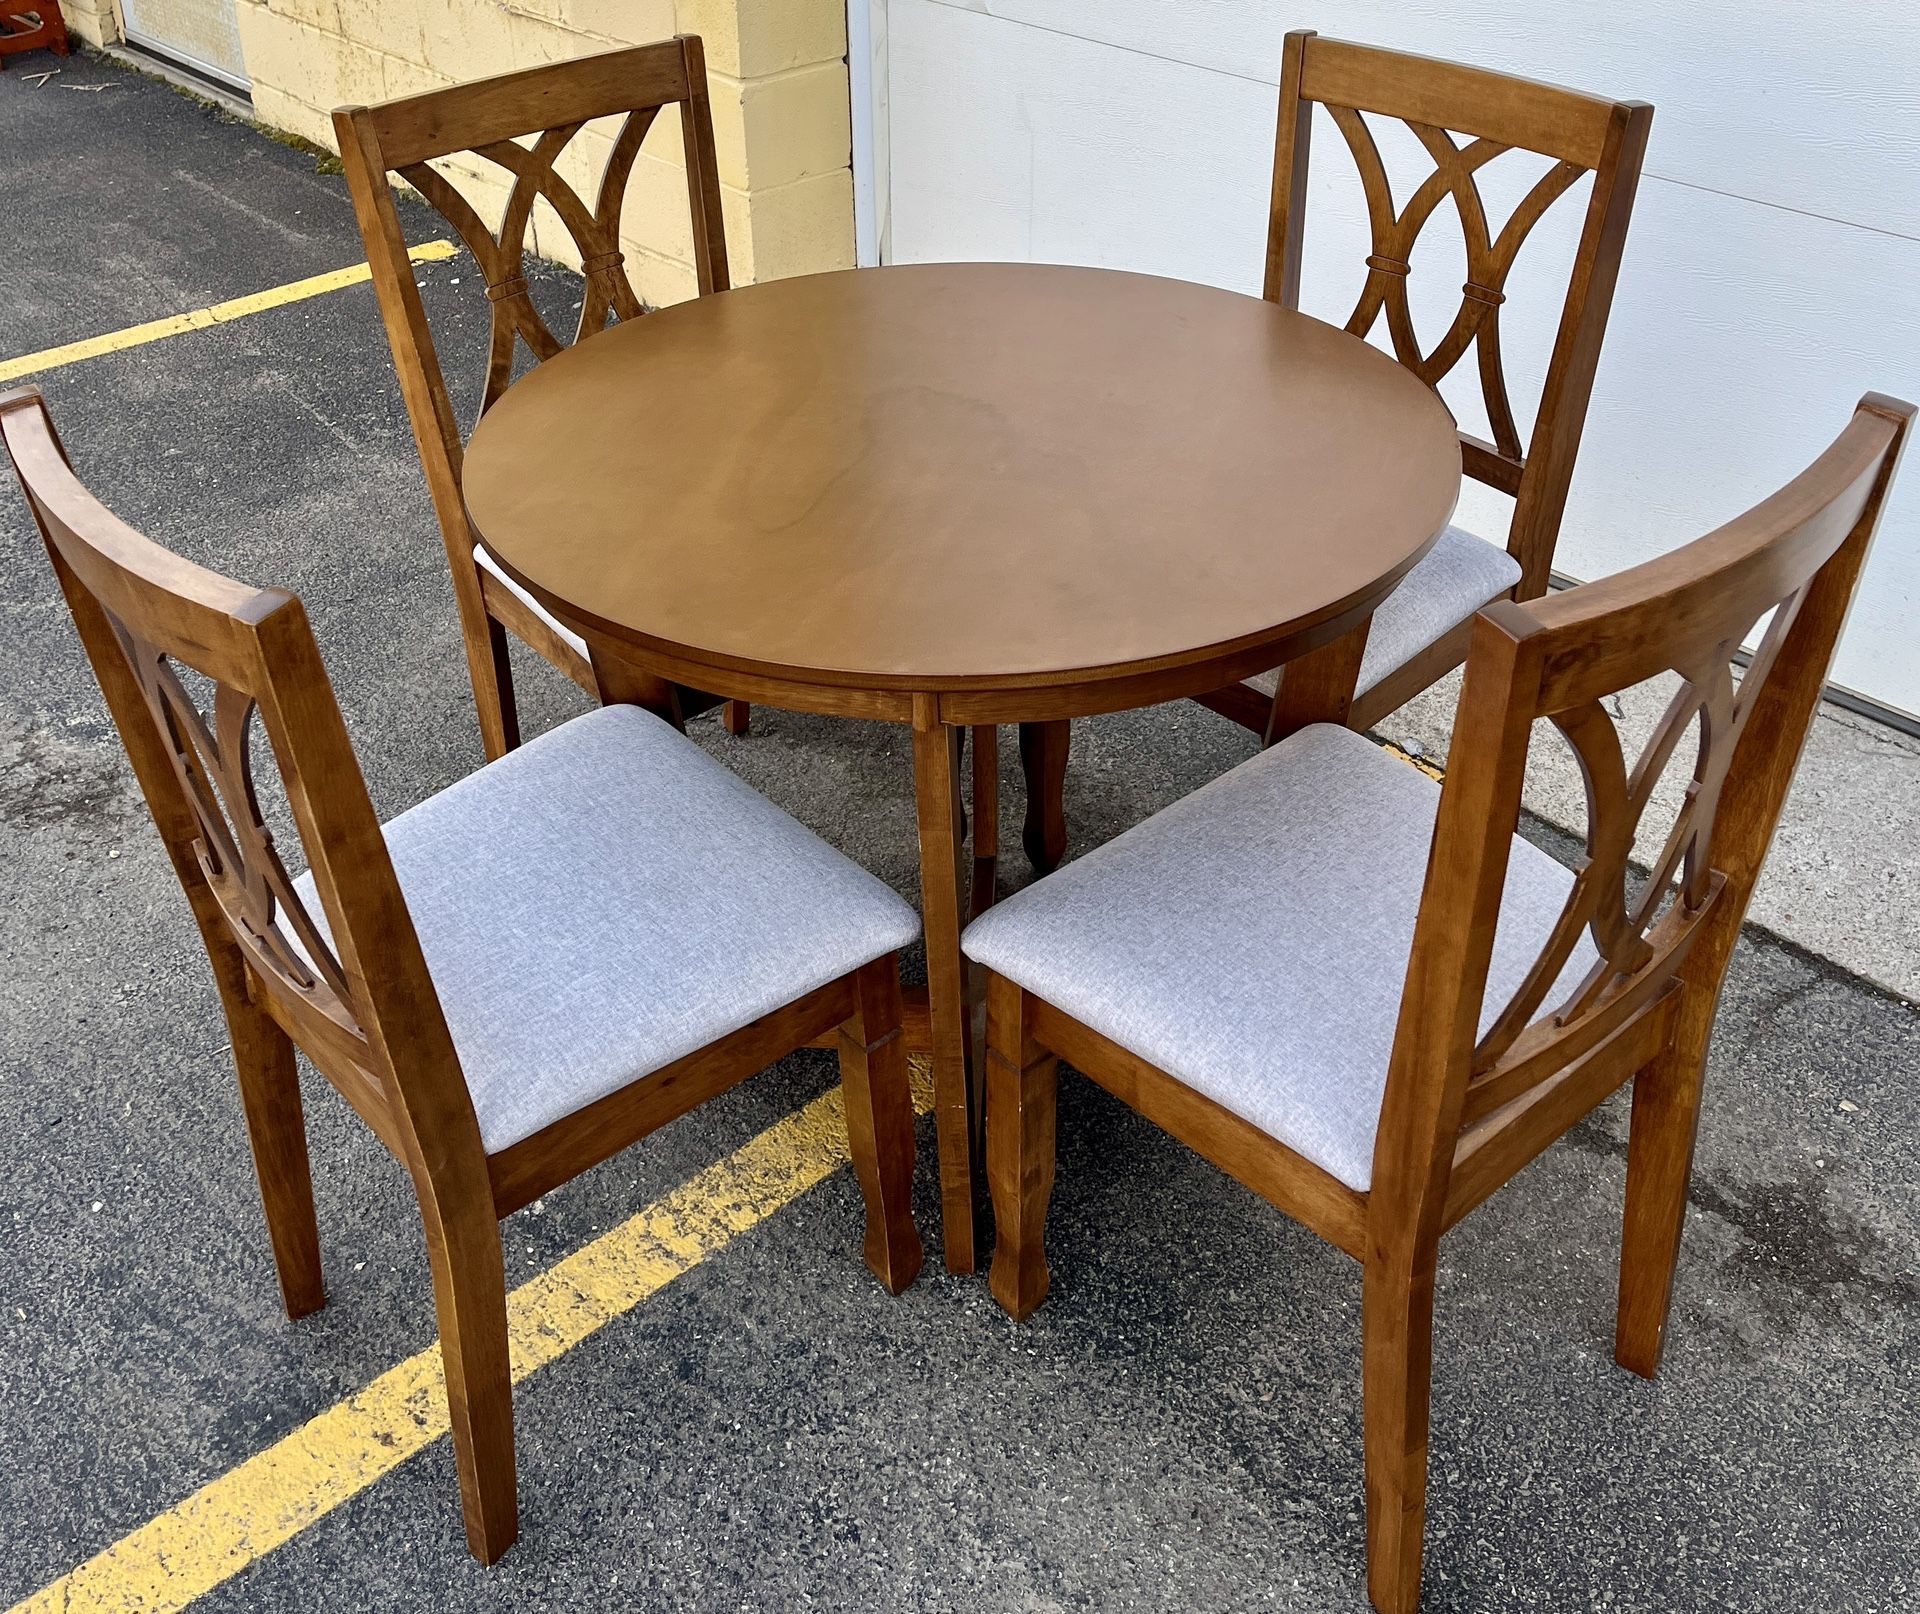 36” Round Dining Table and 4 Chairs Baxton Studio Grey Fabric Upholstered and Walnut Brown Finish